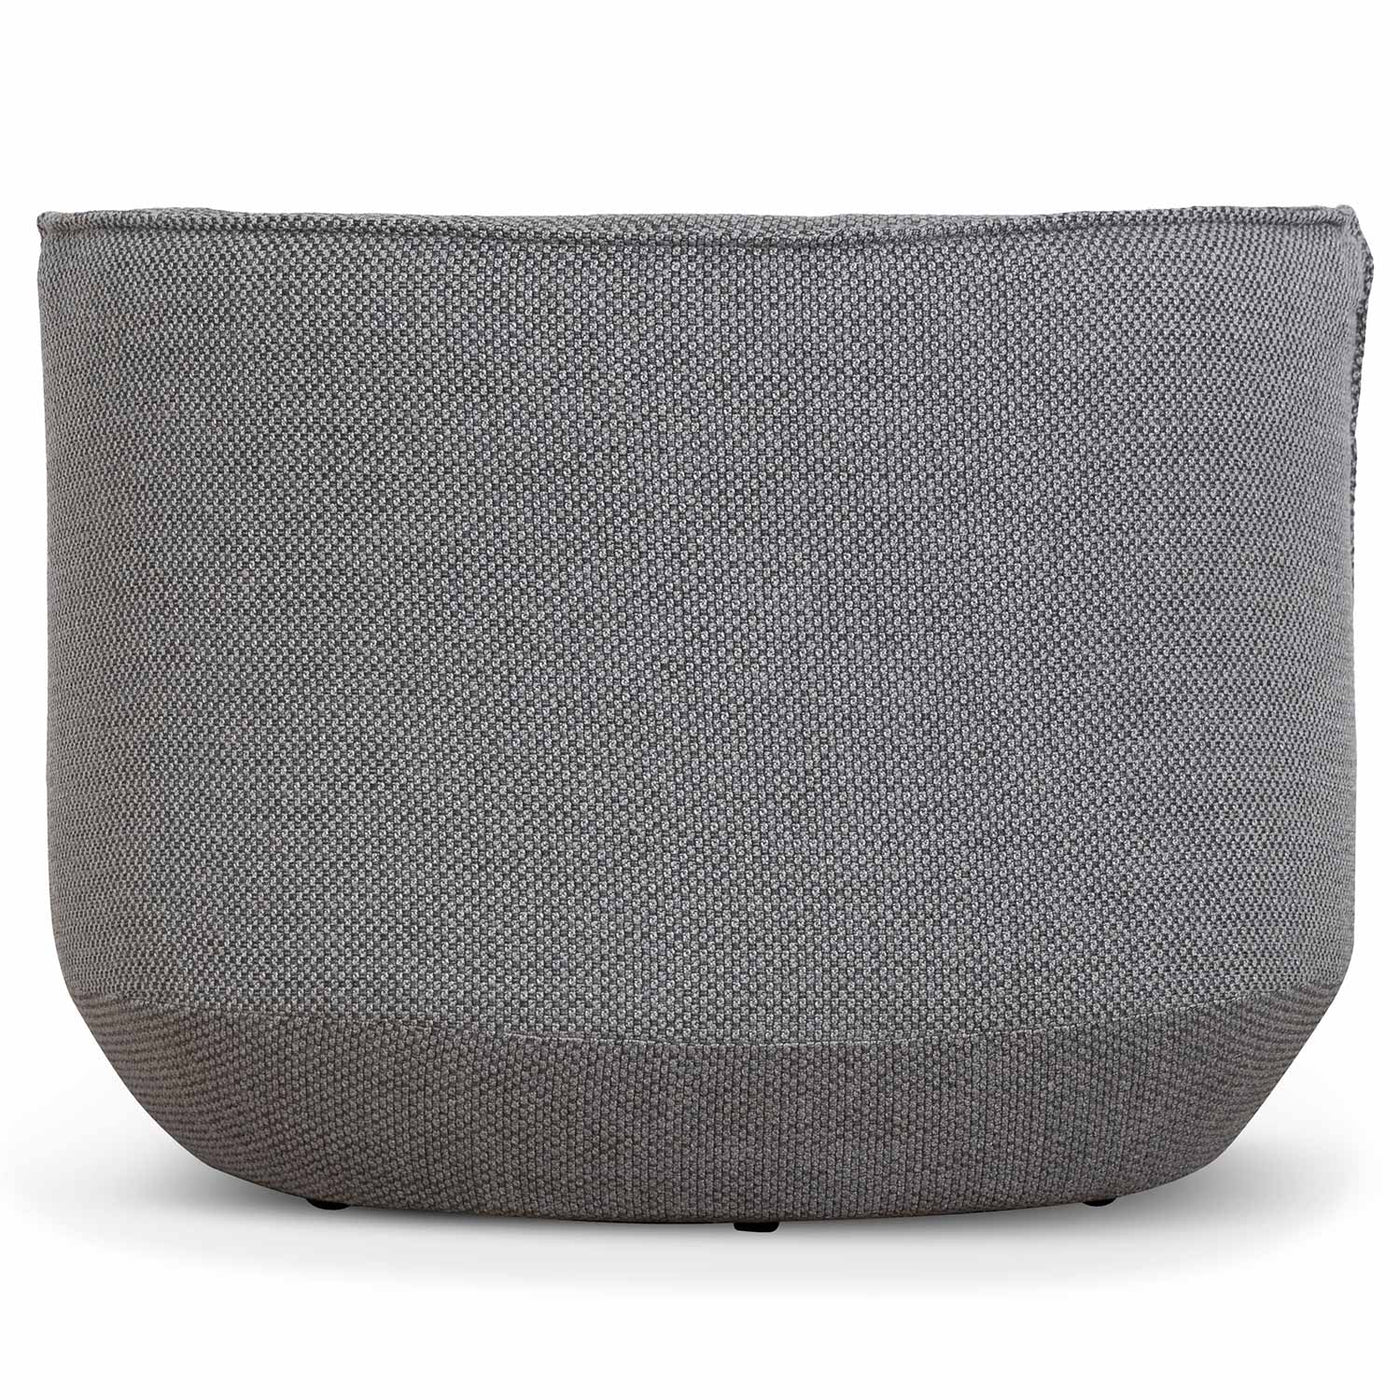 Lounge Chair - Noble Grey